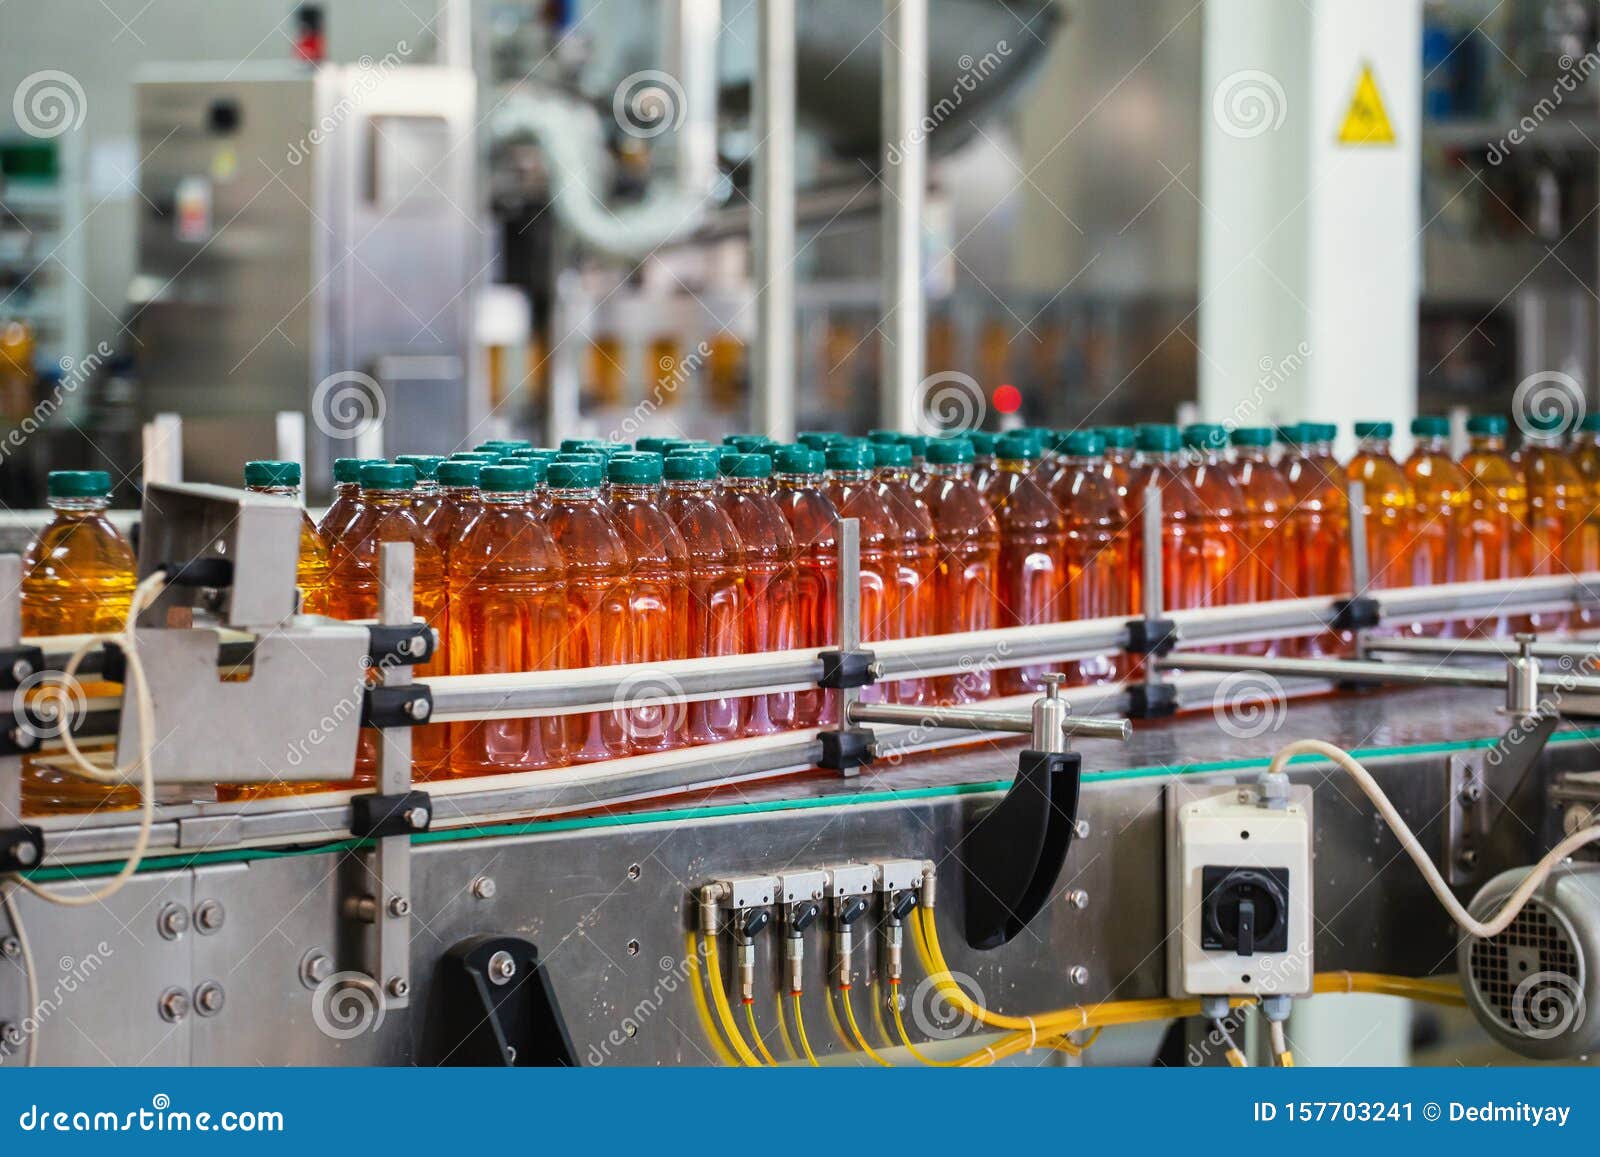 conveyor line with plastic bottles of juice at modern factory equipment. beverage manufacturing plant interior inside